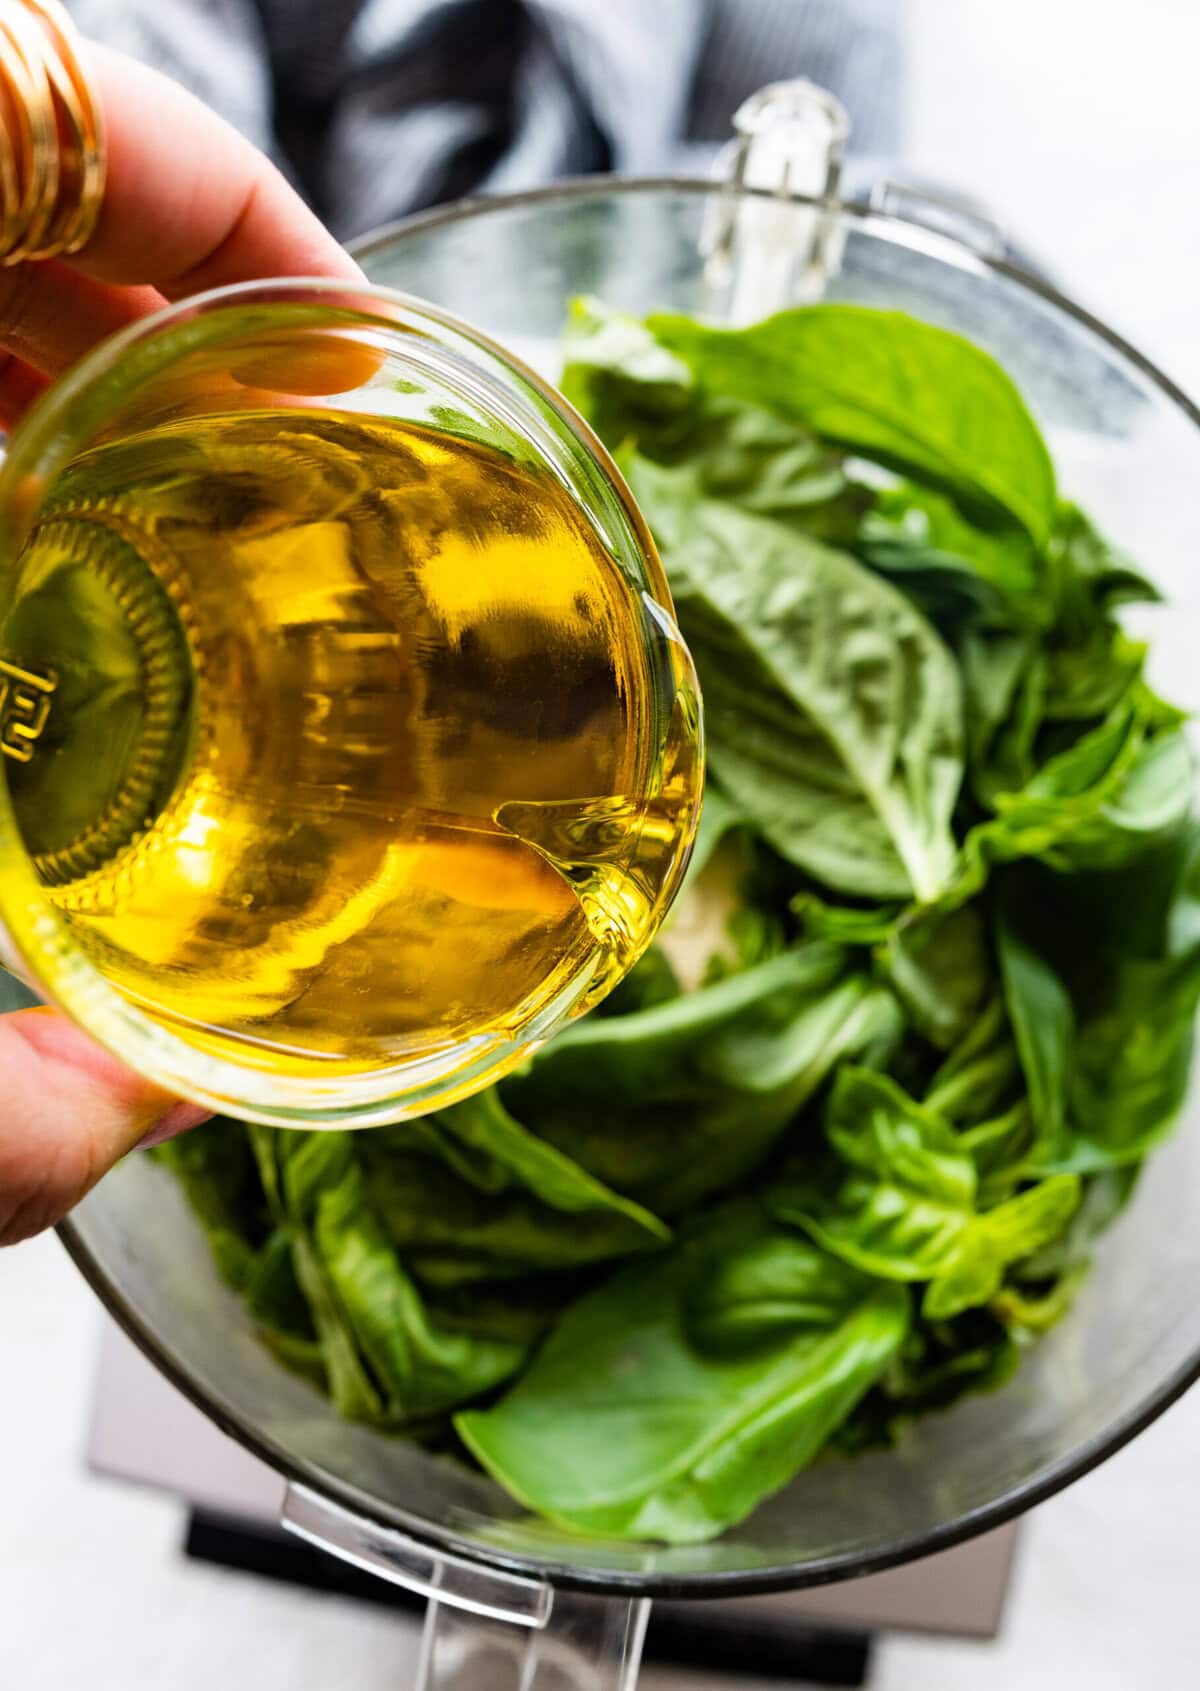 add the olive oil to the basil in the blender.